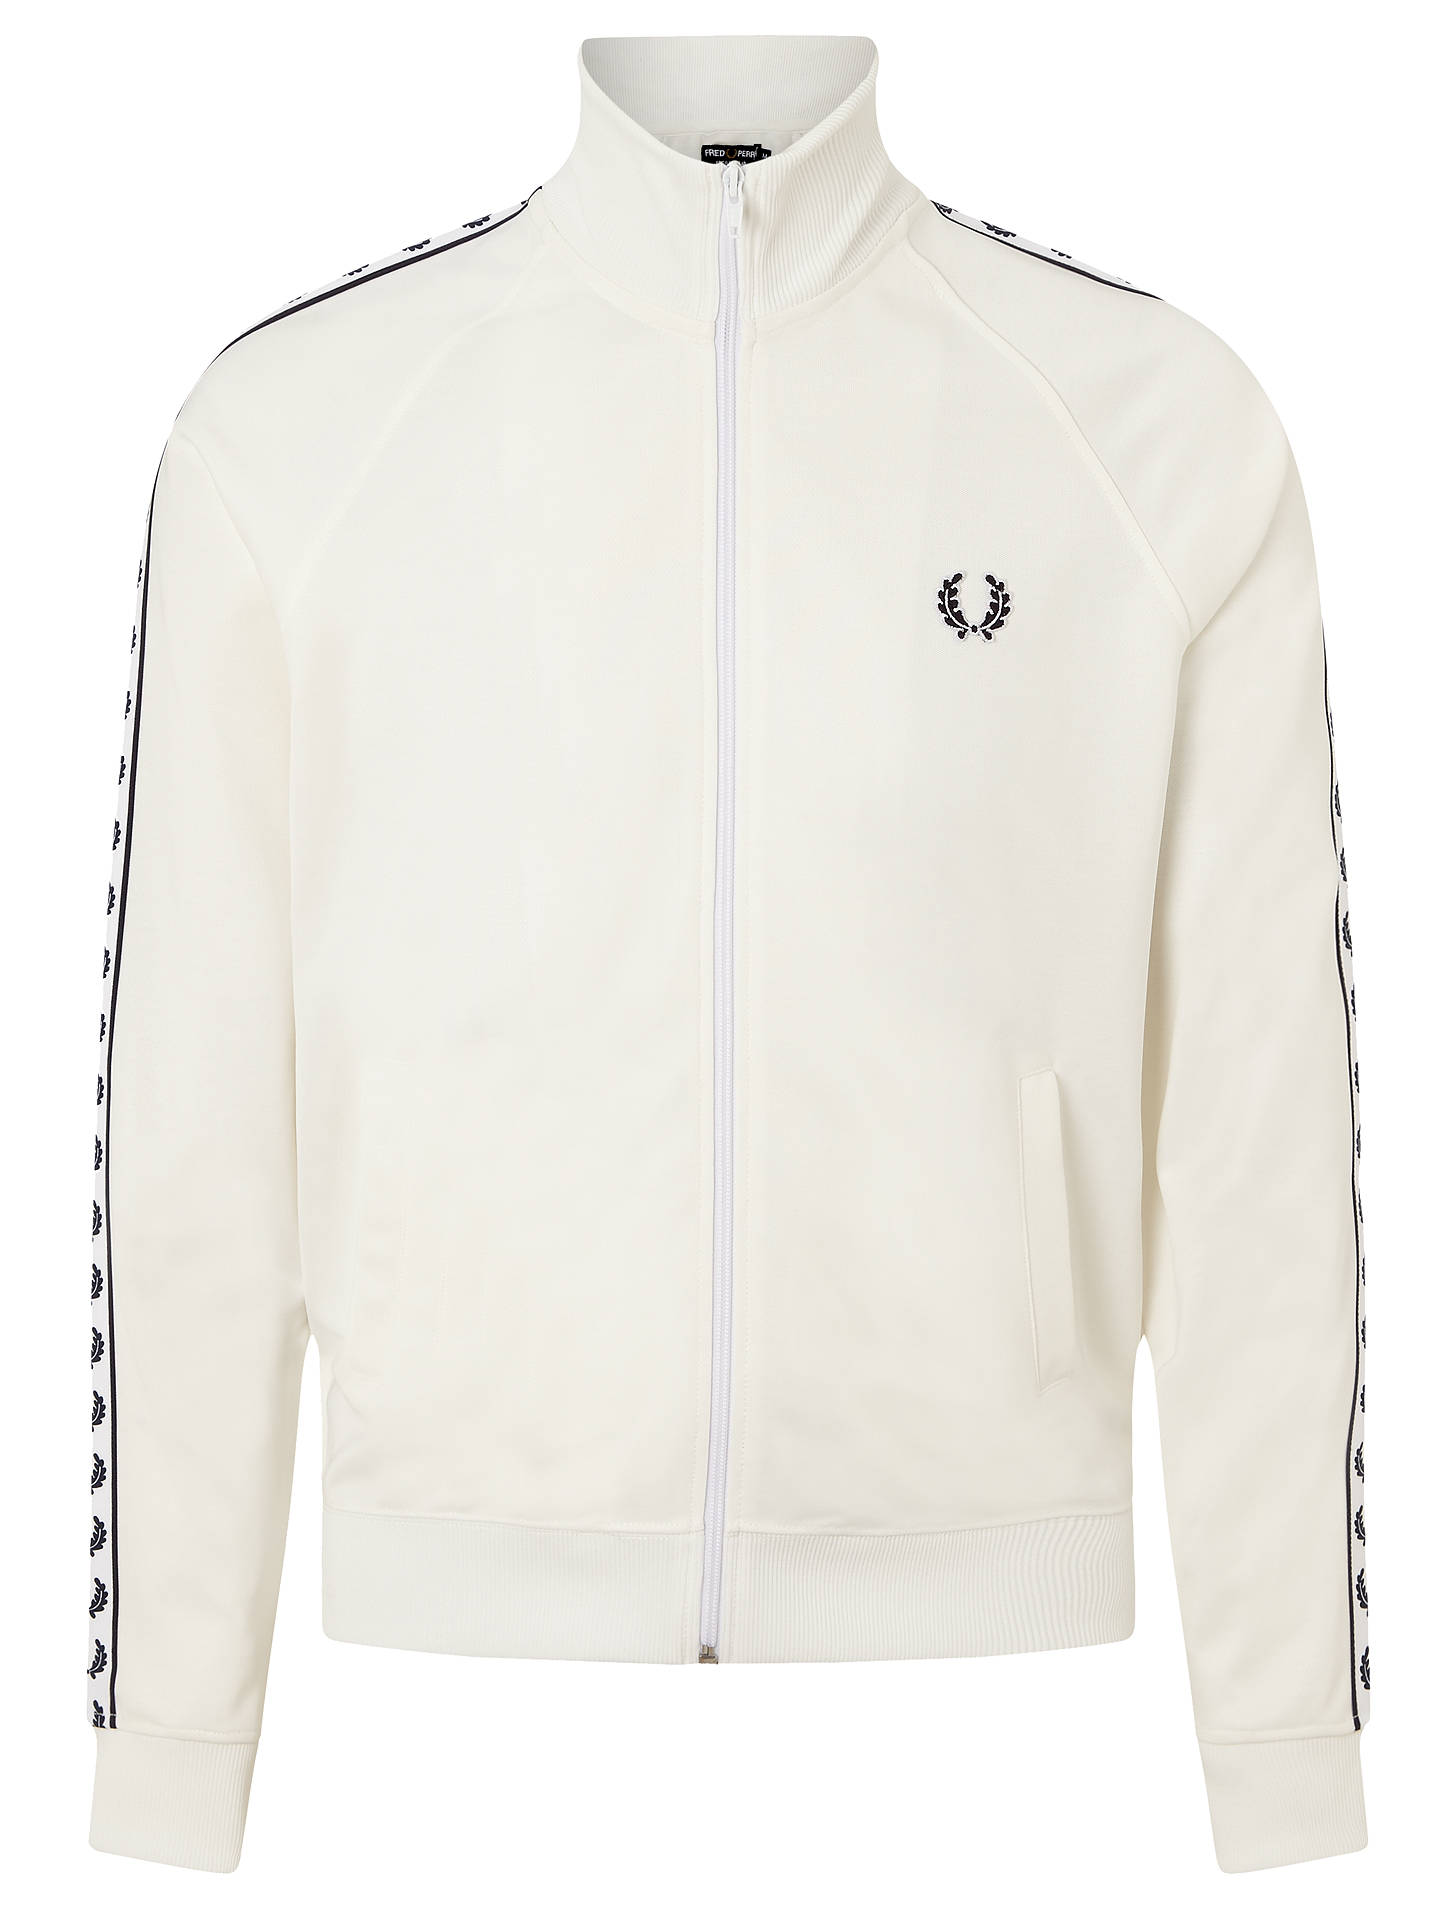 Fred Perry Sports Authentic Laurel Tape Track Jacket, Snow White at